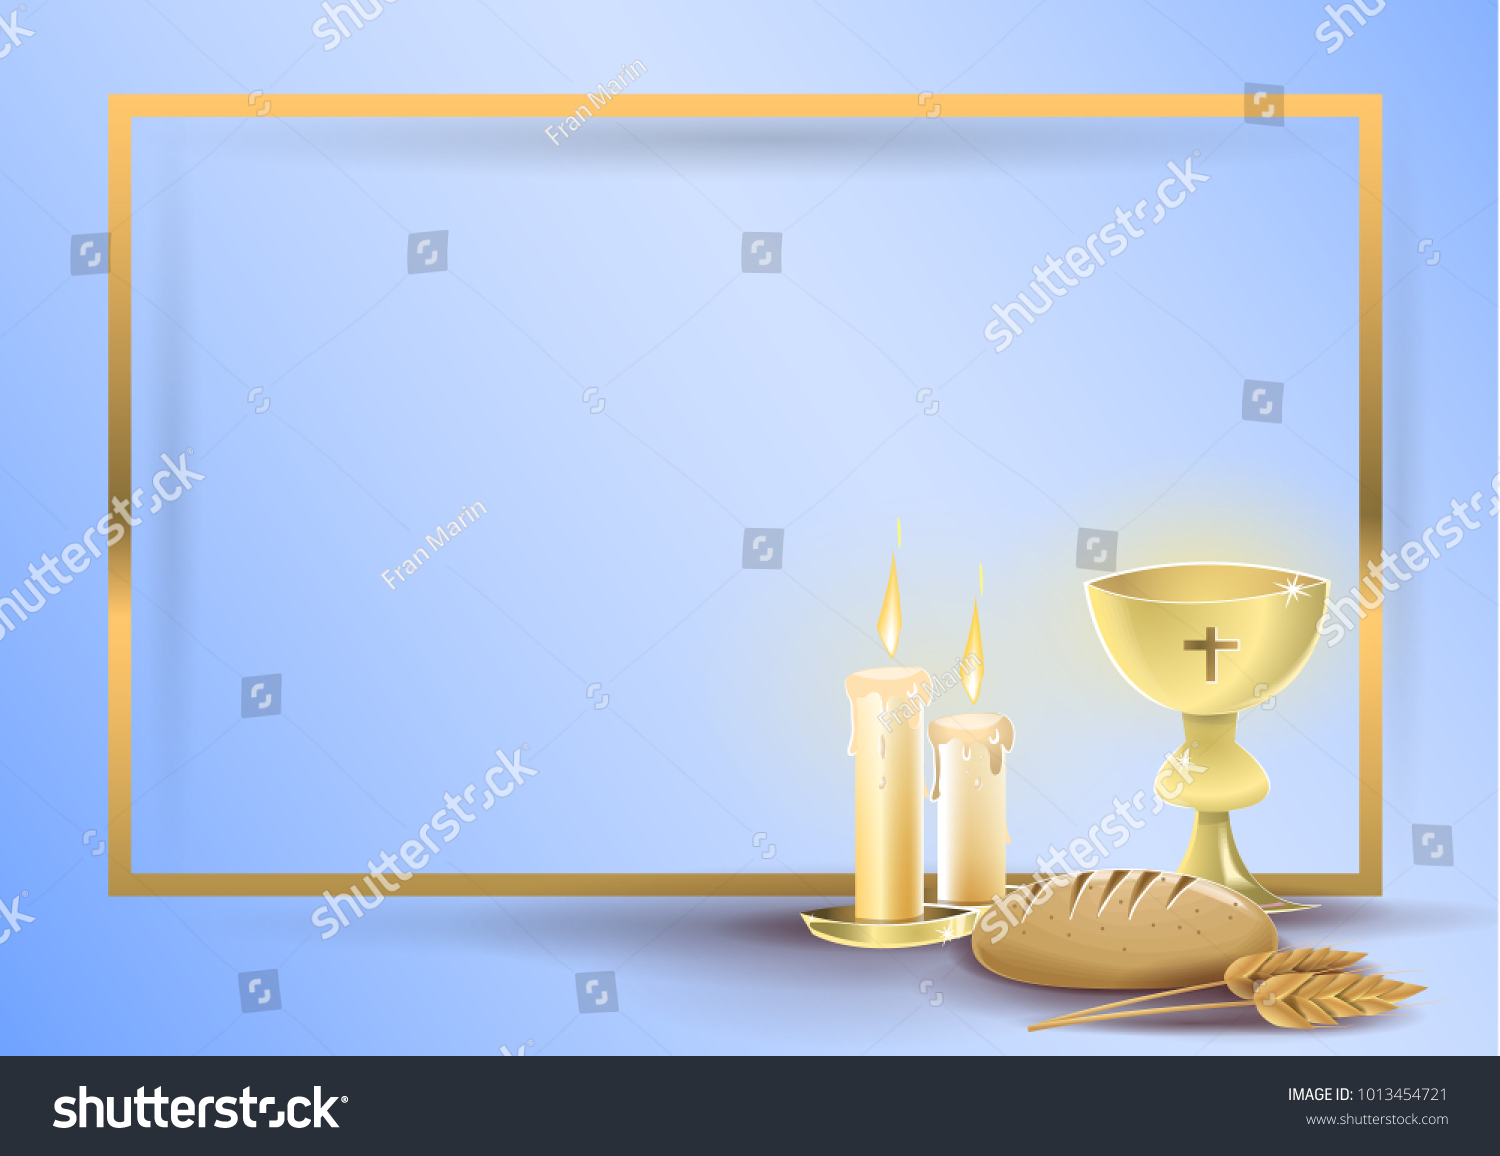 SVG of First communion religious invitation card: Religious elements of communion and baptism, on a blue background with a golden border. Vector image svg